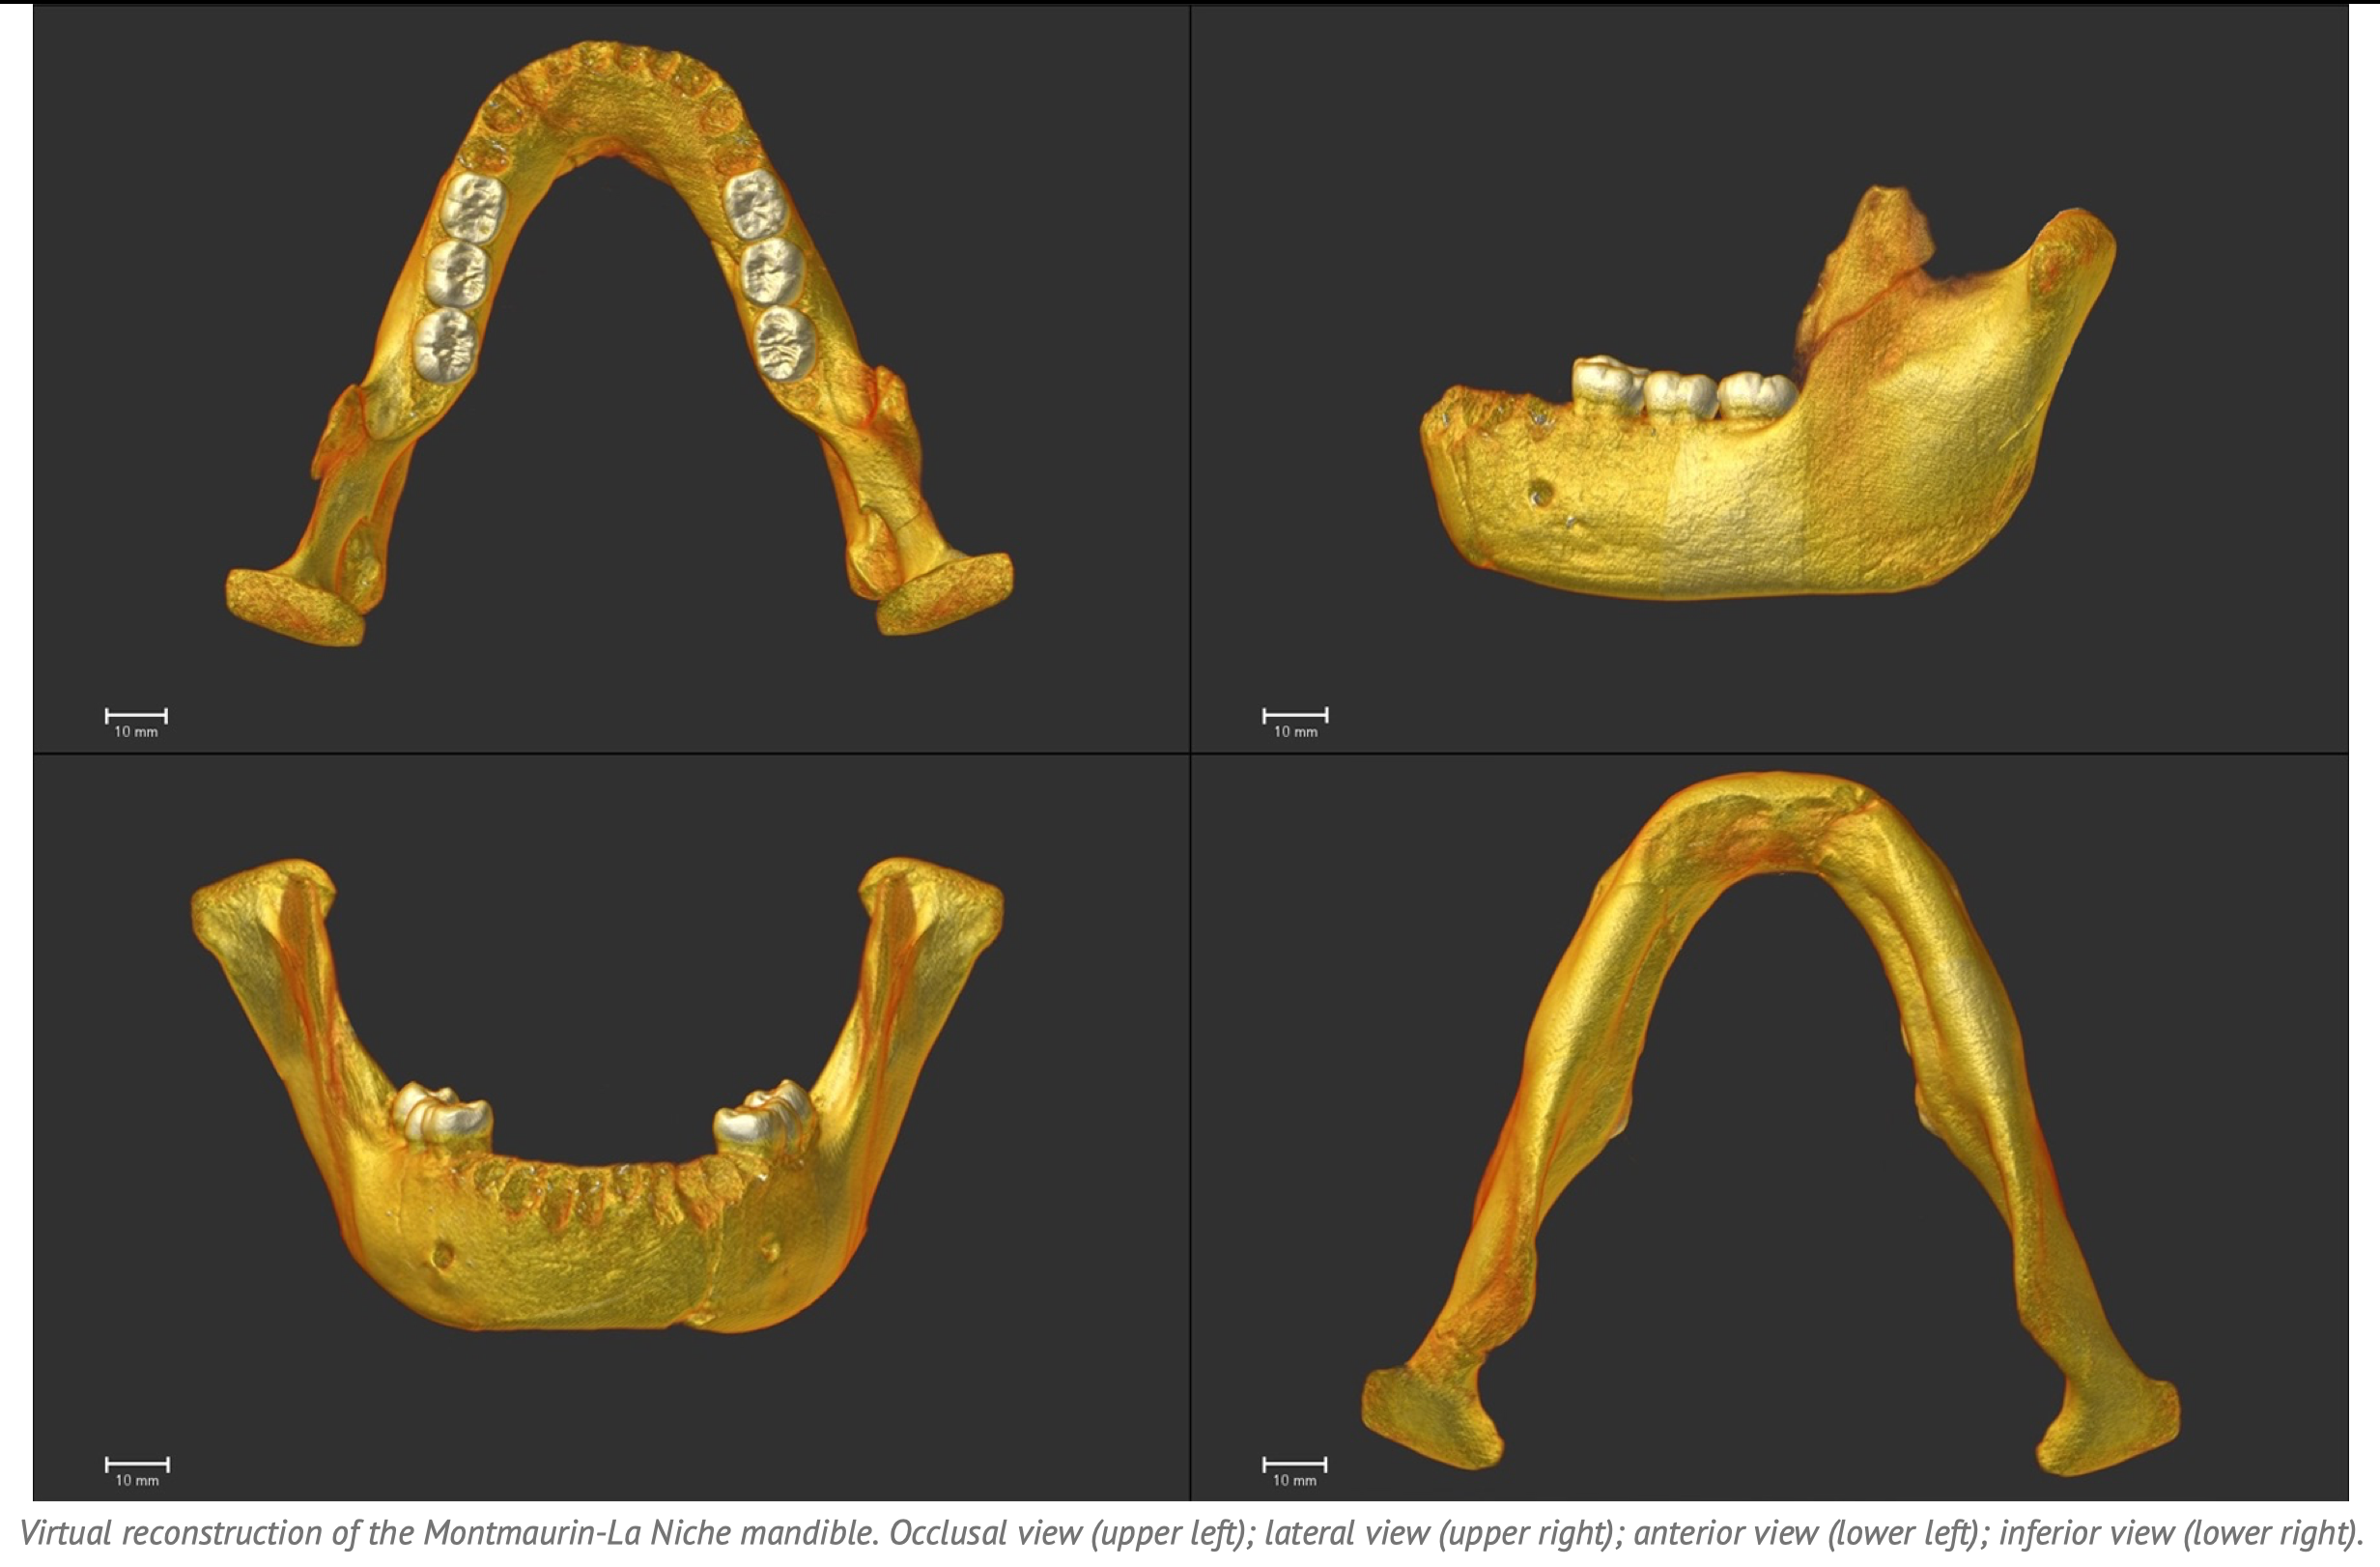 Virtual reconstruction of the Montmaurin-La Niche mandible. Occlusal view (upper left); lateral view (upper right); anterior view (lower left); inferior view (lower right).  